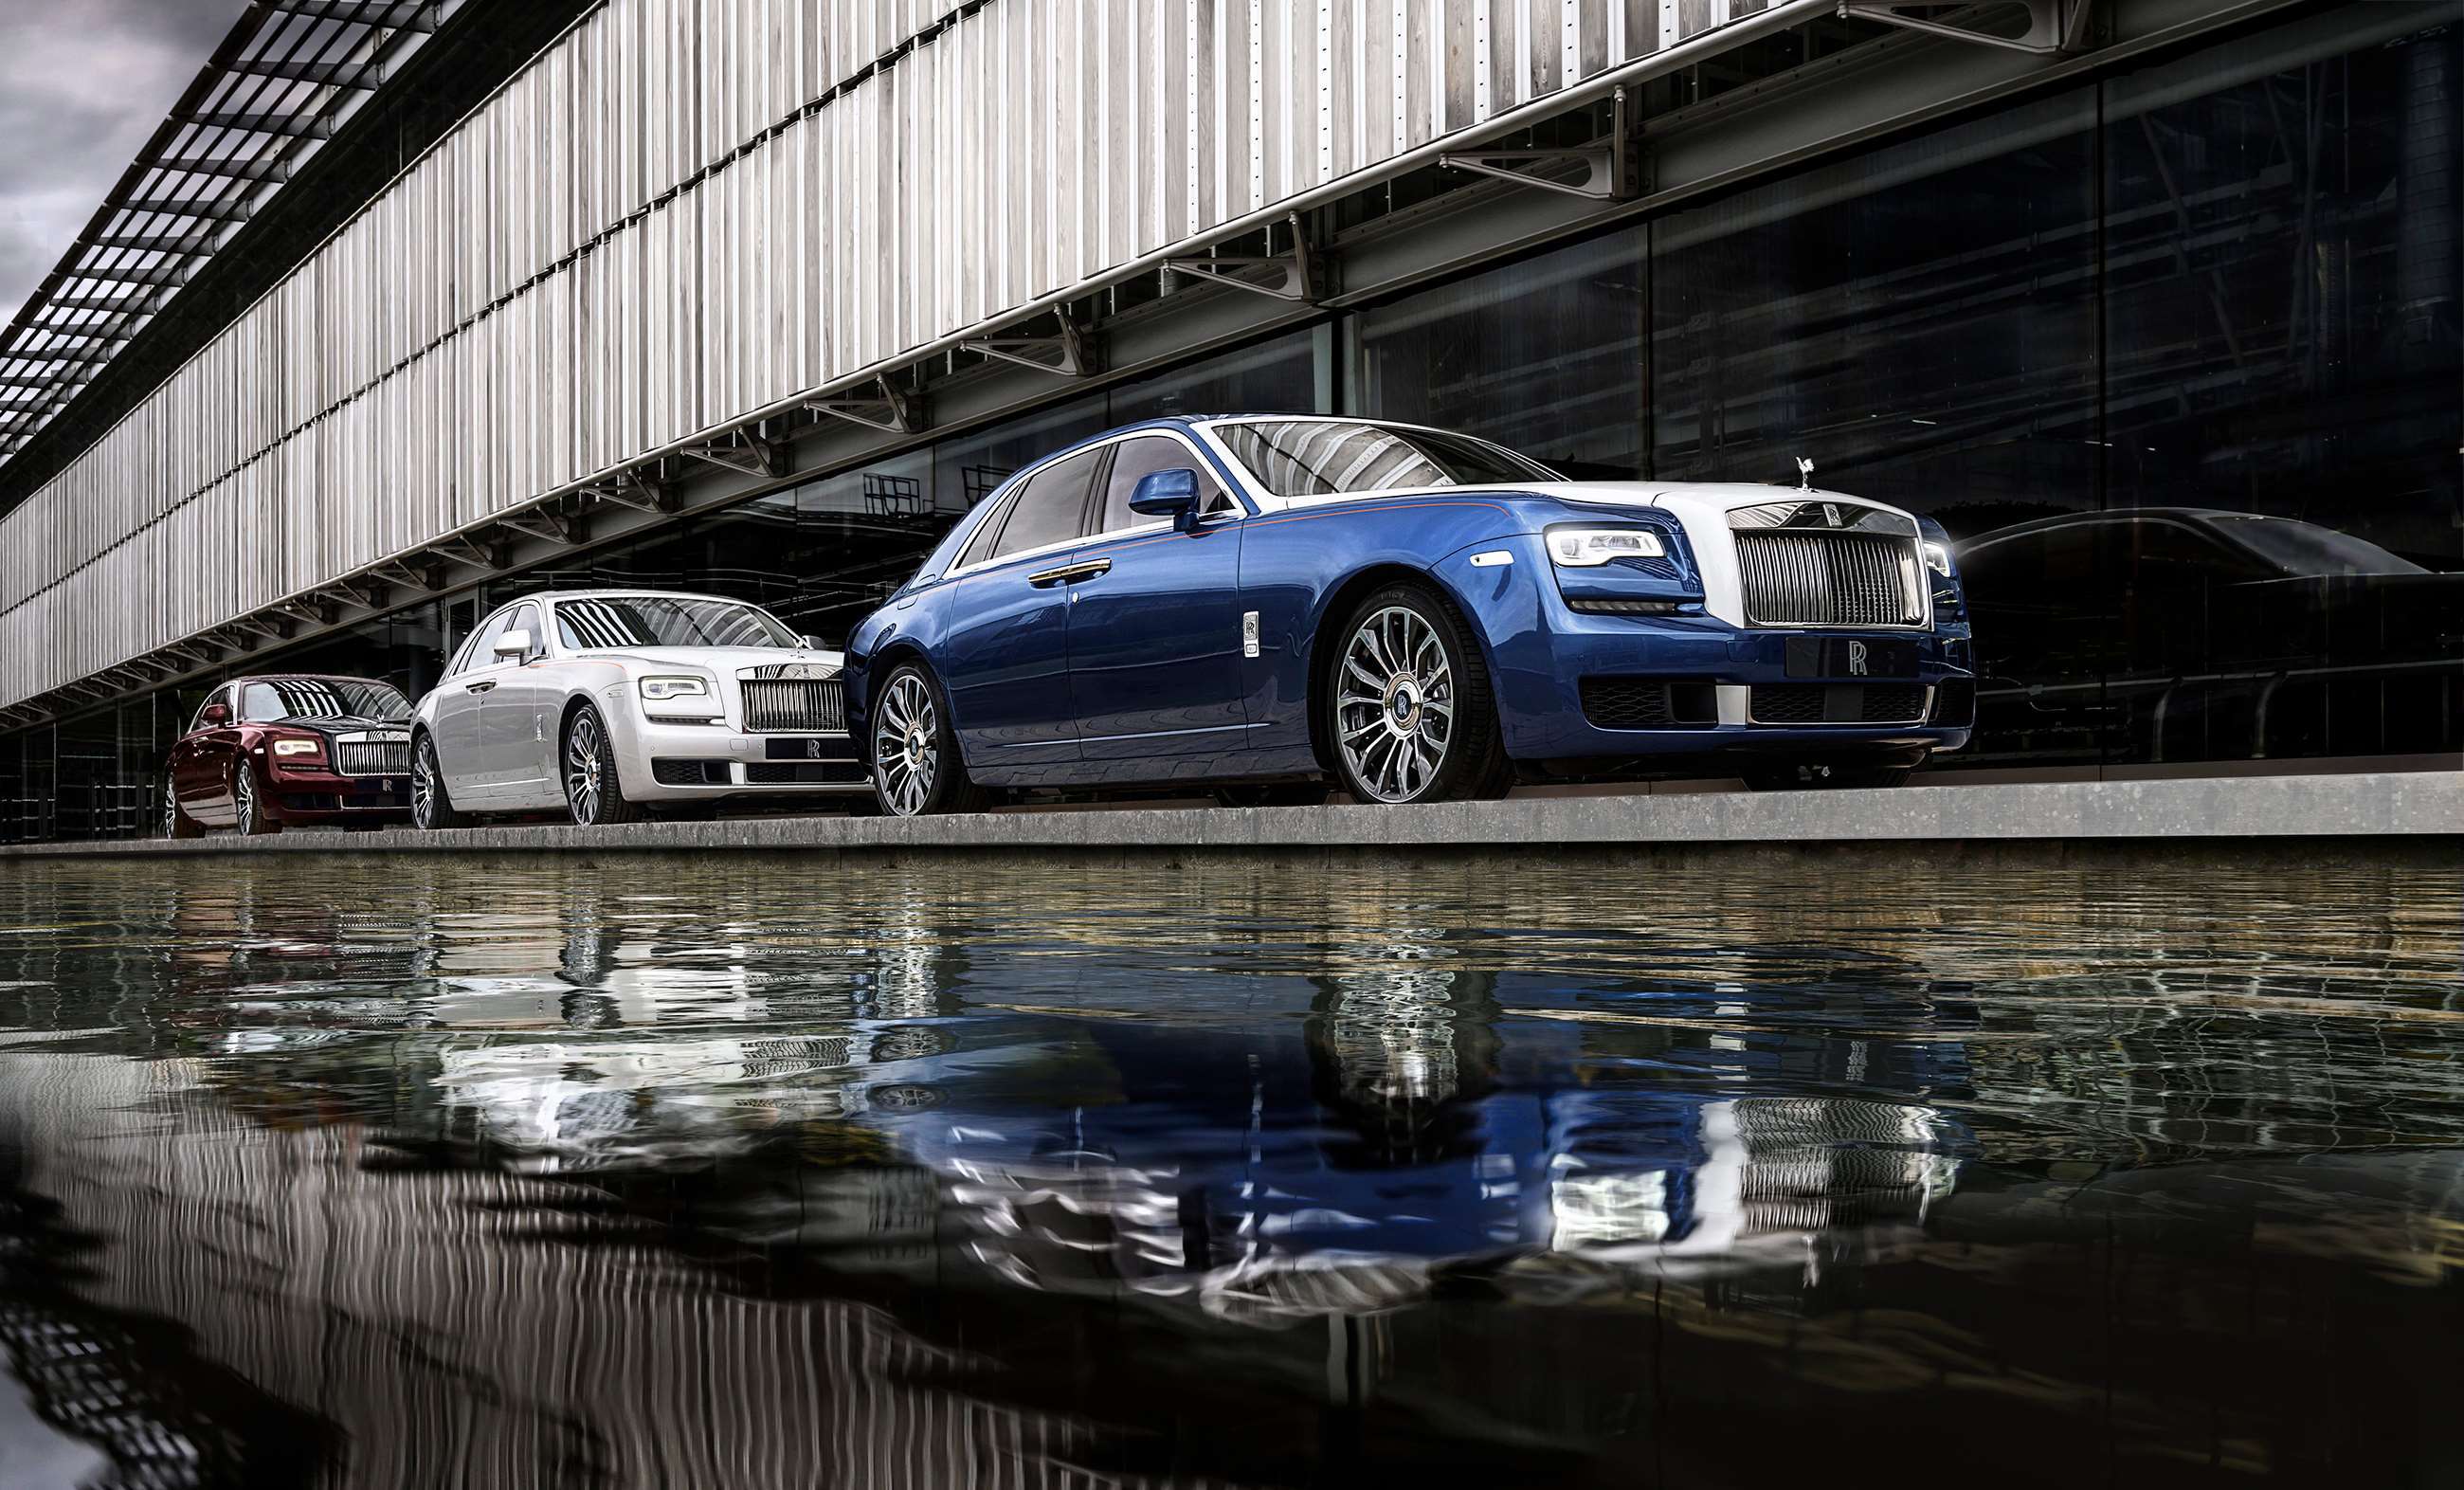 rolls-royce-ghost-zenith-collection-red-silver-blue-goodwood-15082019.jpg